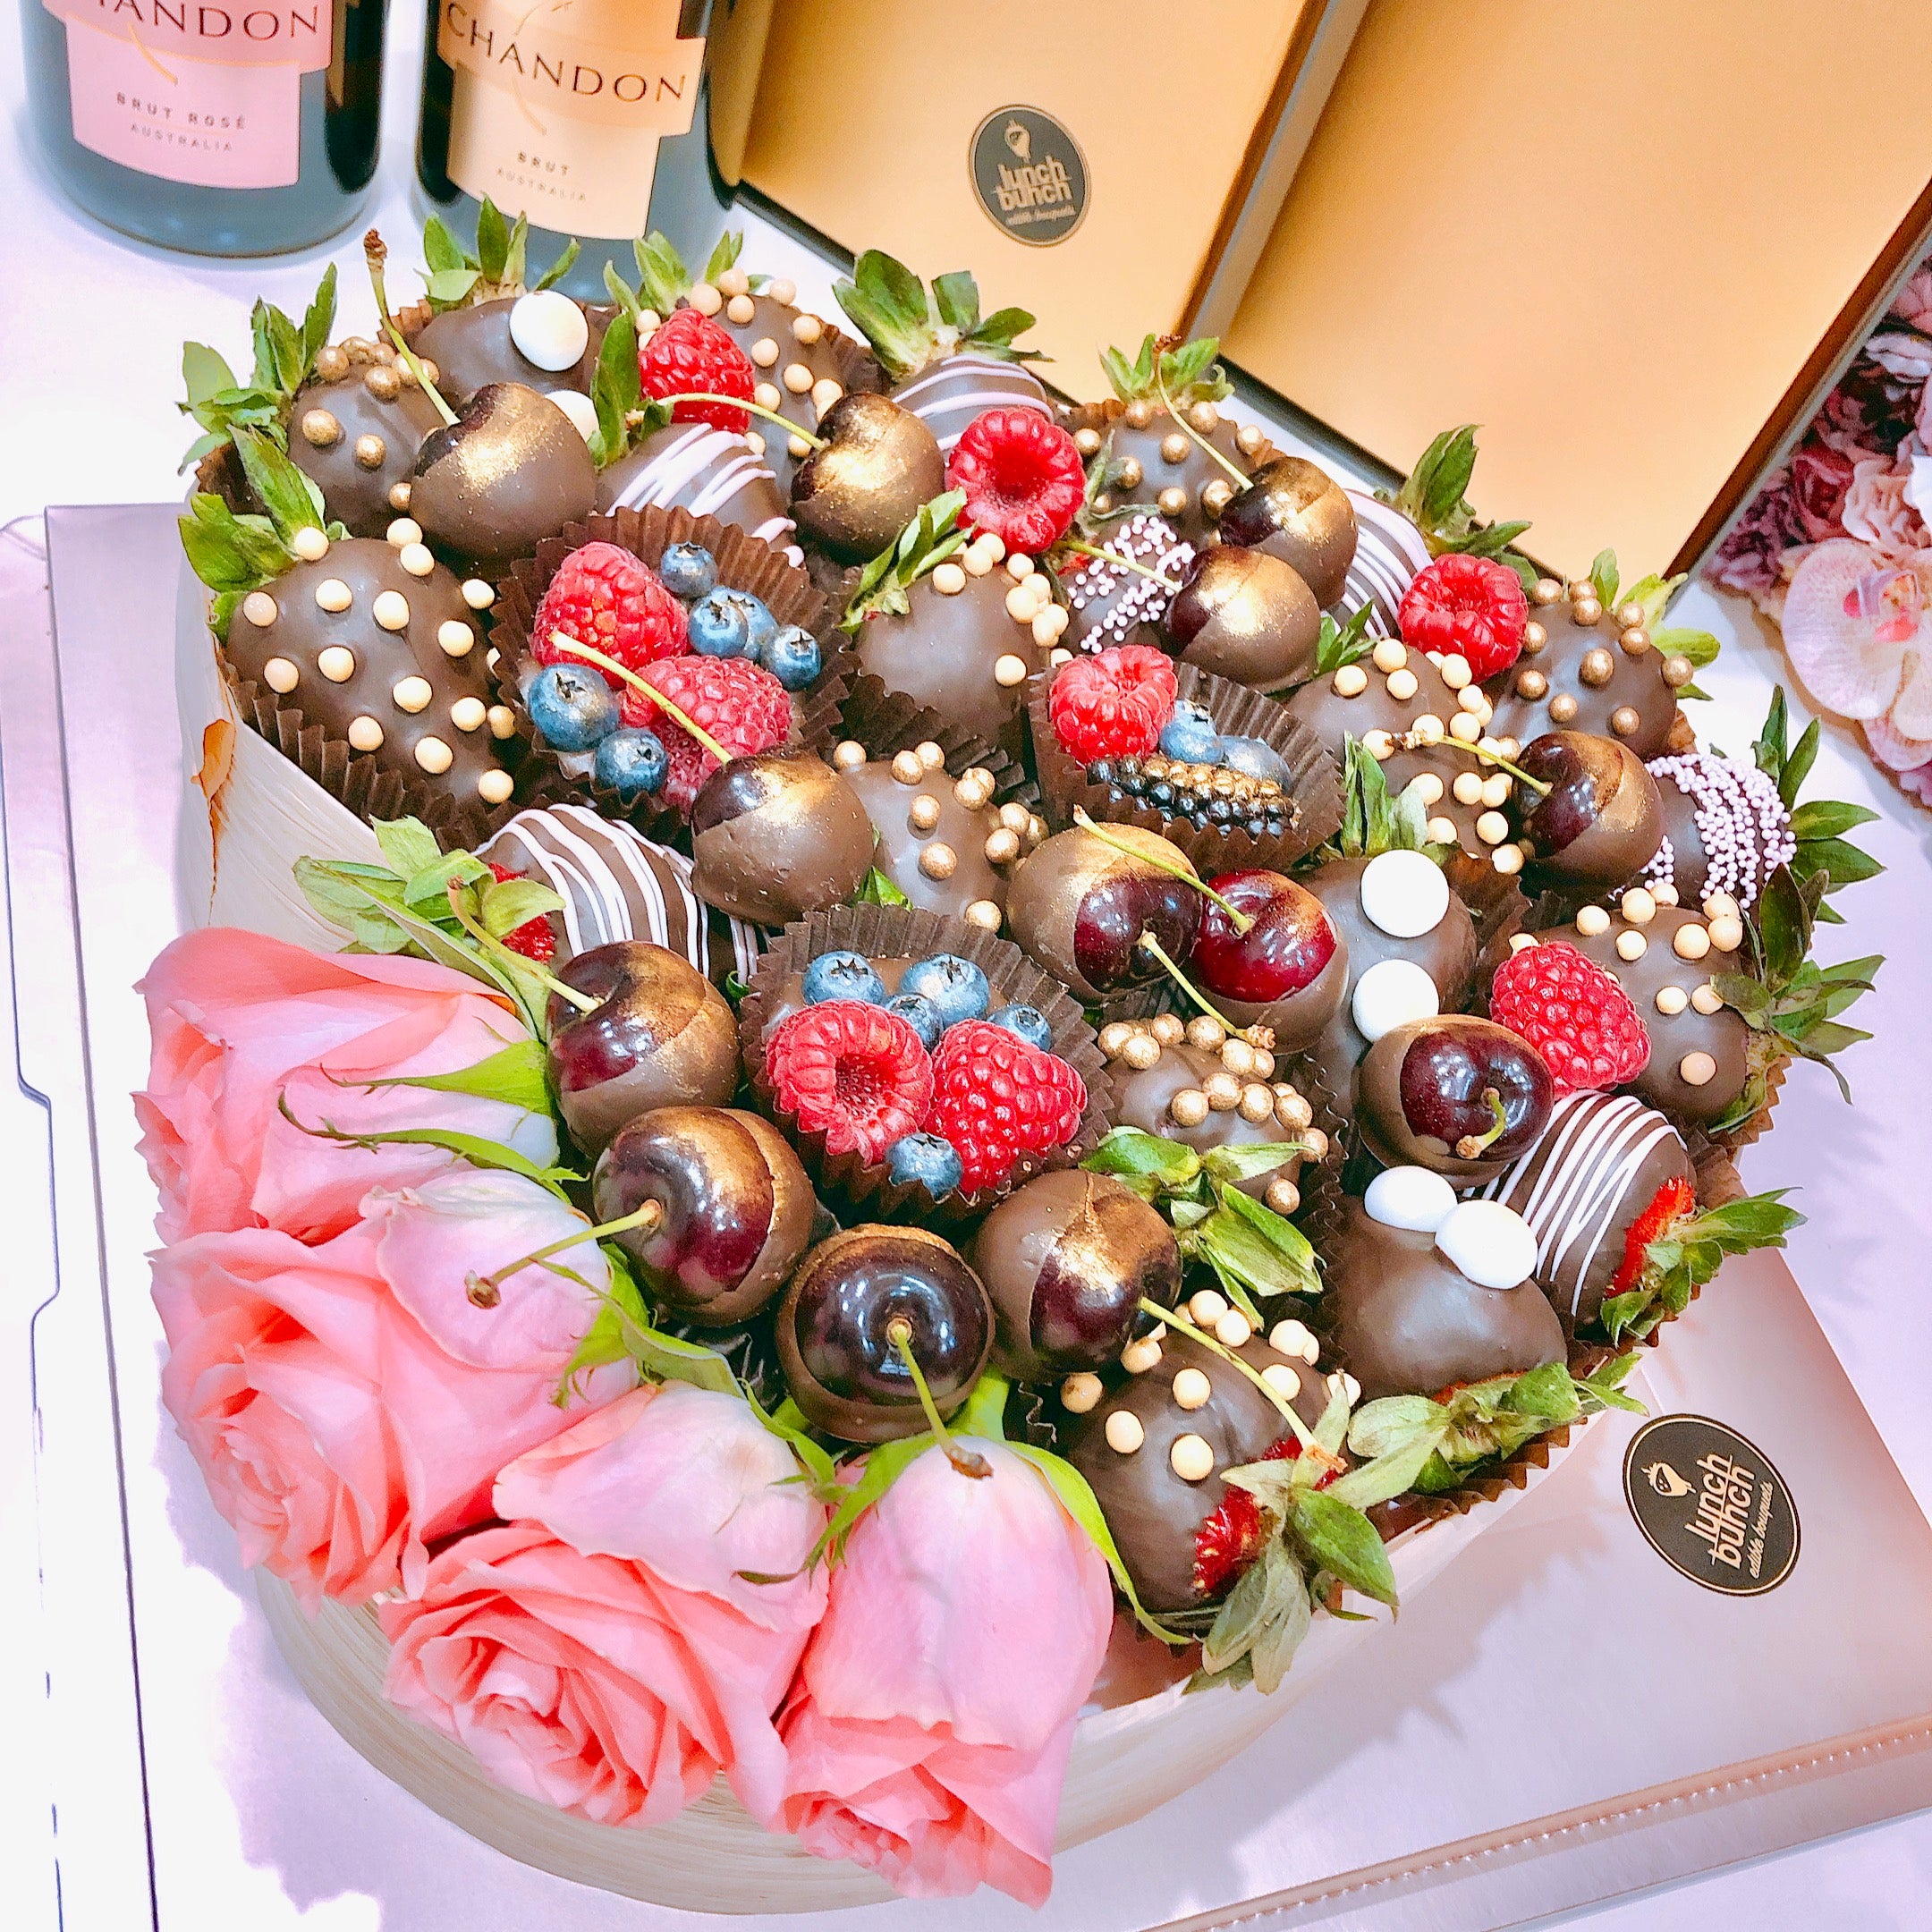 Roses and chocolate covered strawberries in love heart shaped box gift present birthday hamper